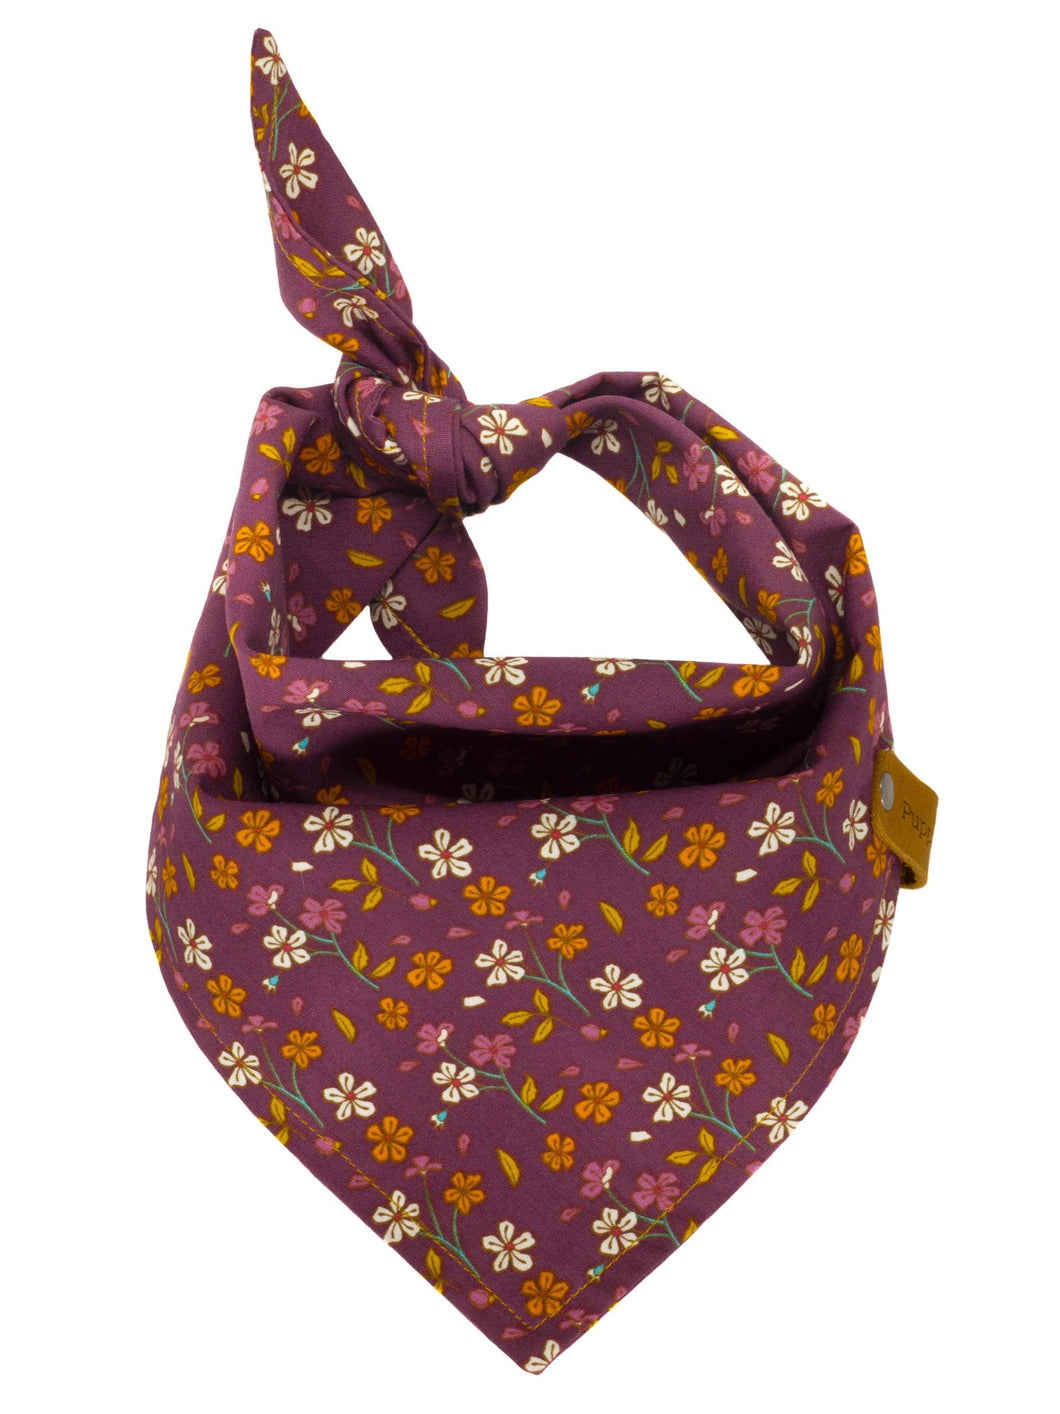 Autumn Floral Bandana by Puppy Riot